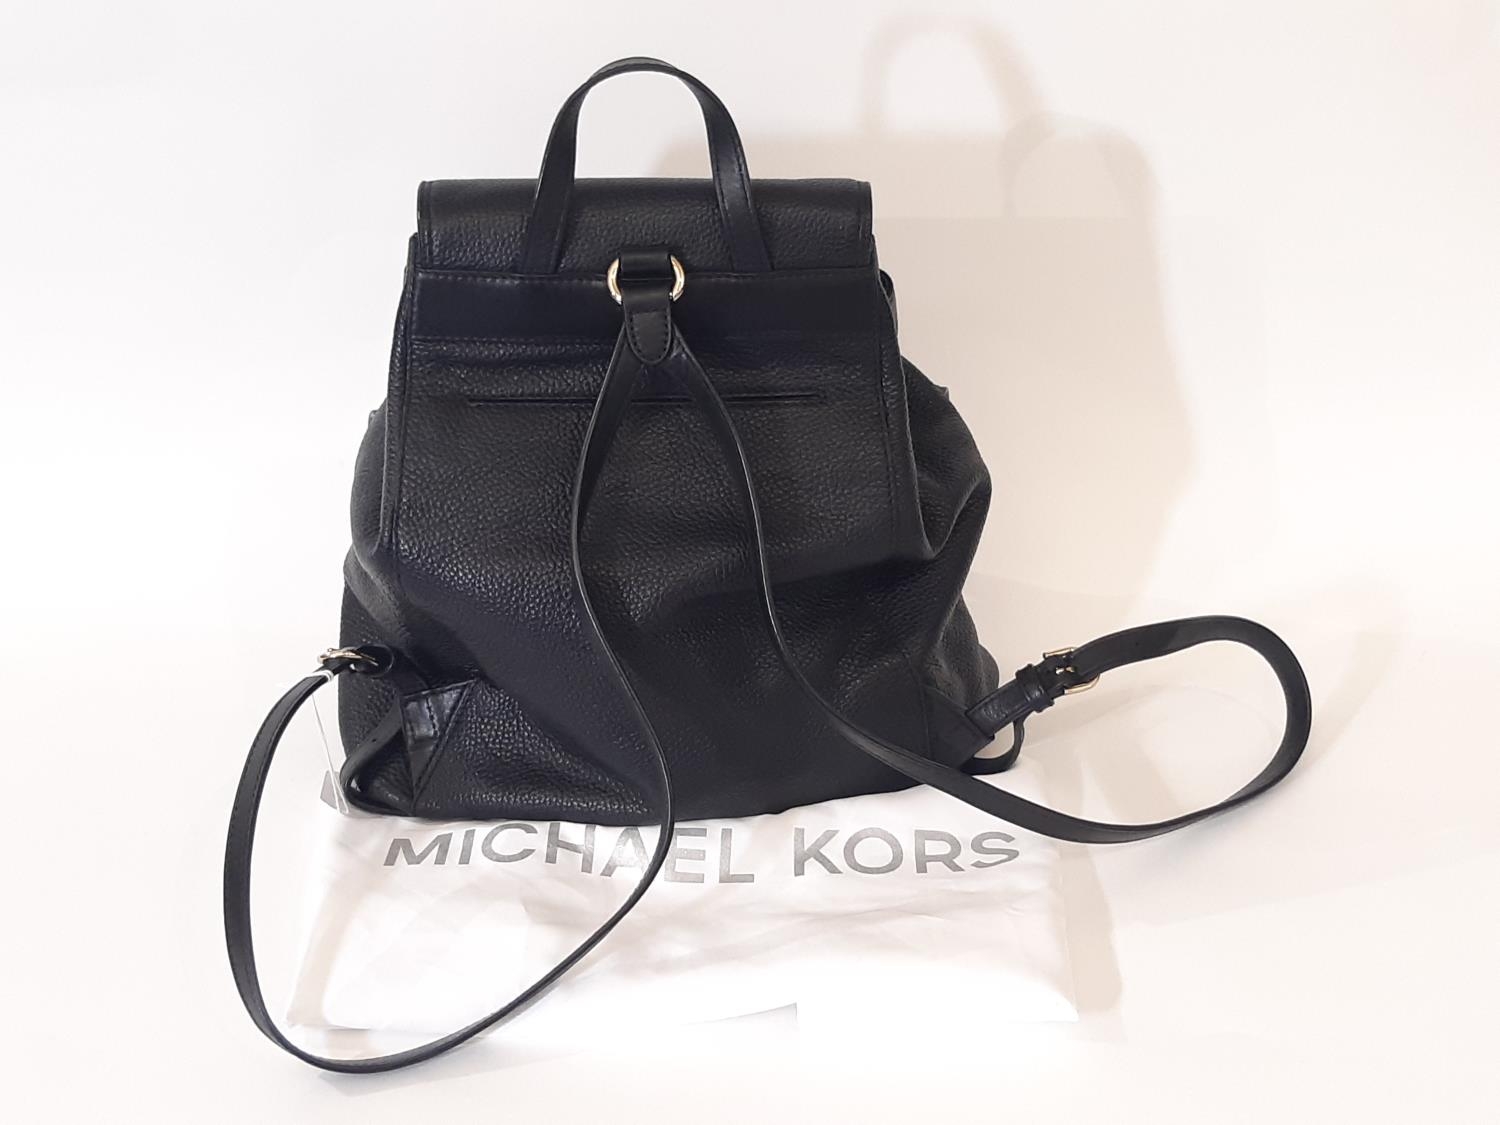 Ladies backpack style bag by Michael Kors in textured black leather with top flap, 2 front pockets - Image 2 of 3